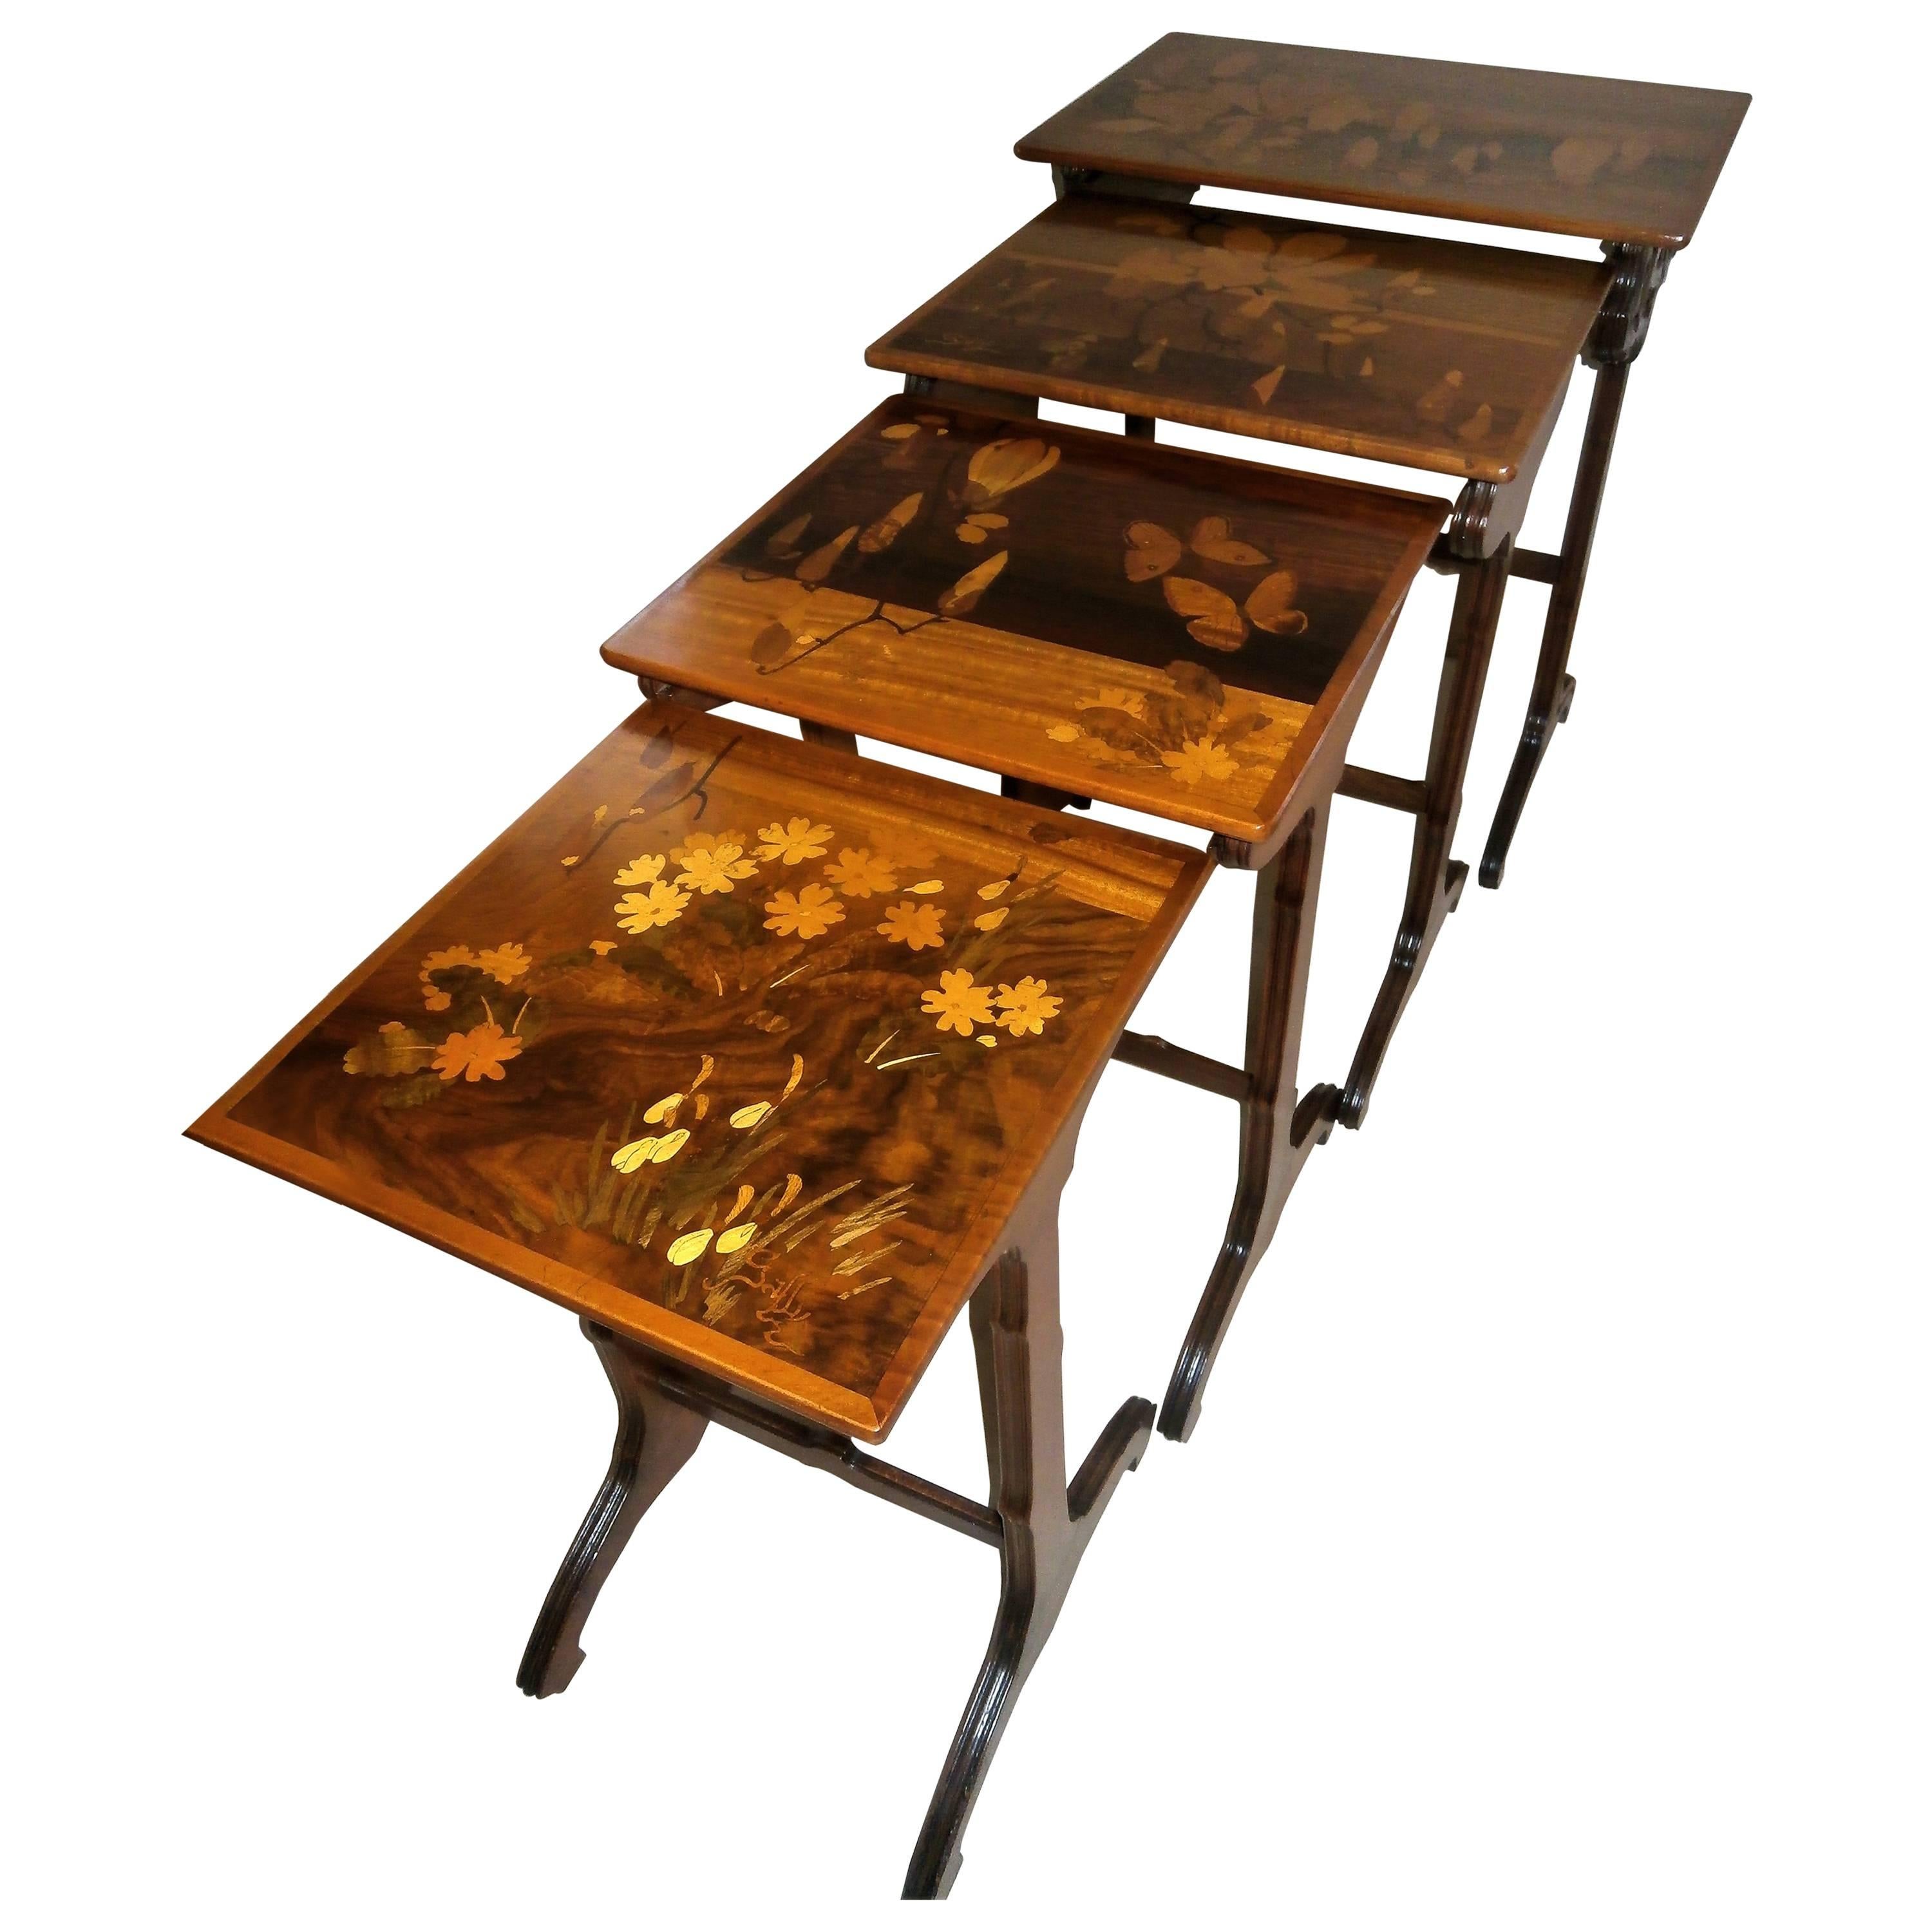 Stunning Art Nouveau Marquetry Nesting Tables Signed by Gallé